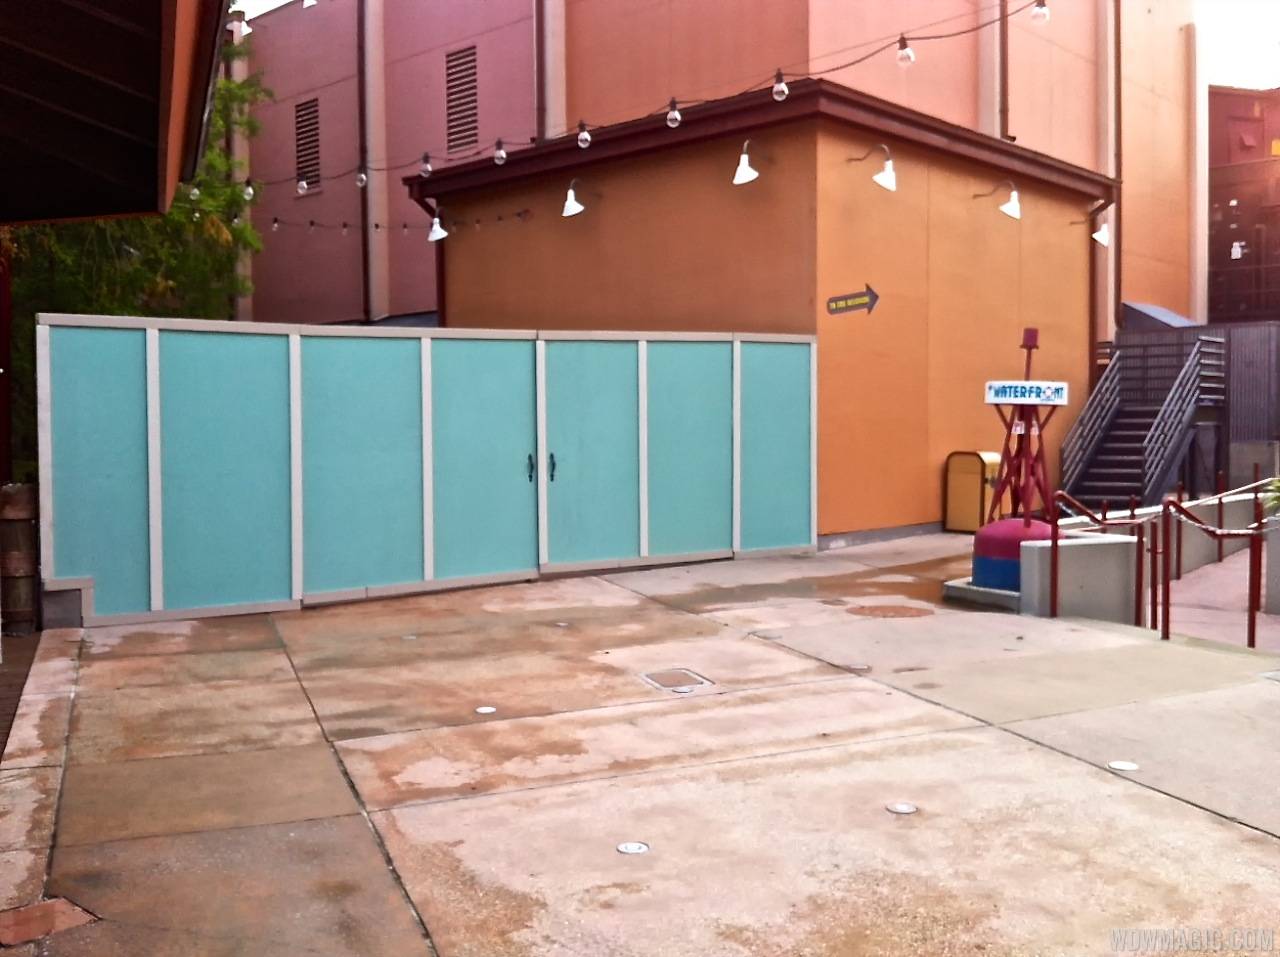 PHOTOS - More construction walls up for Disney Springs build